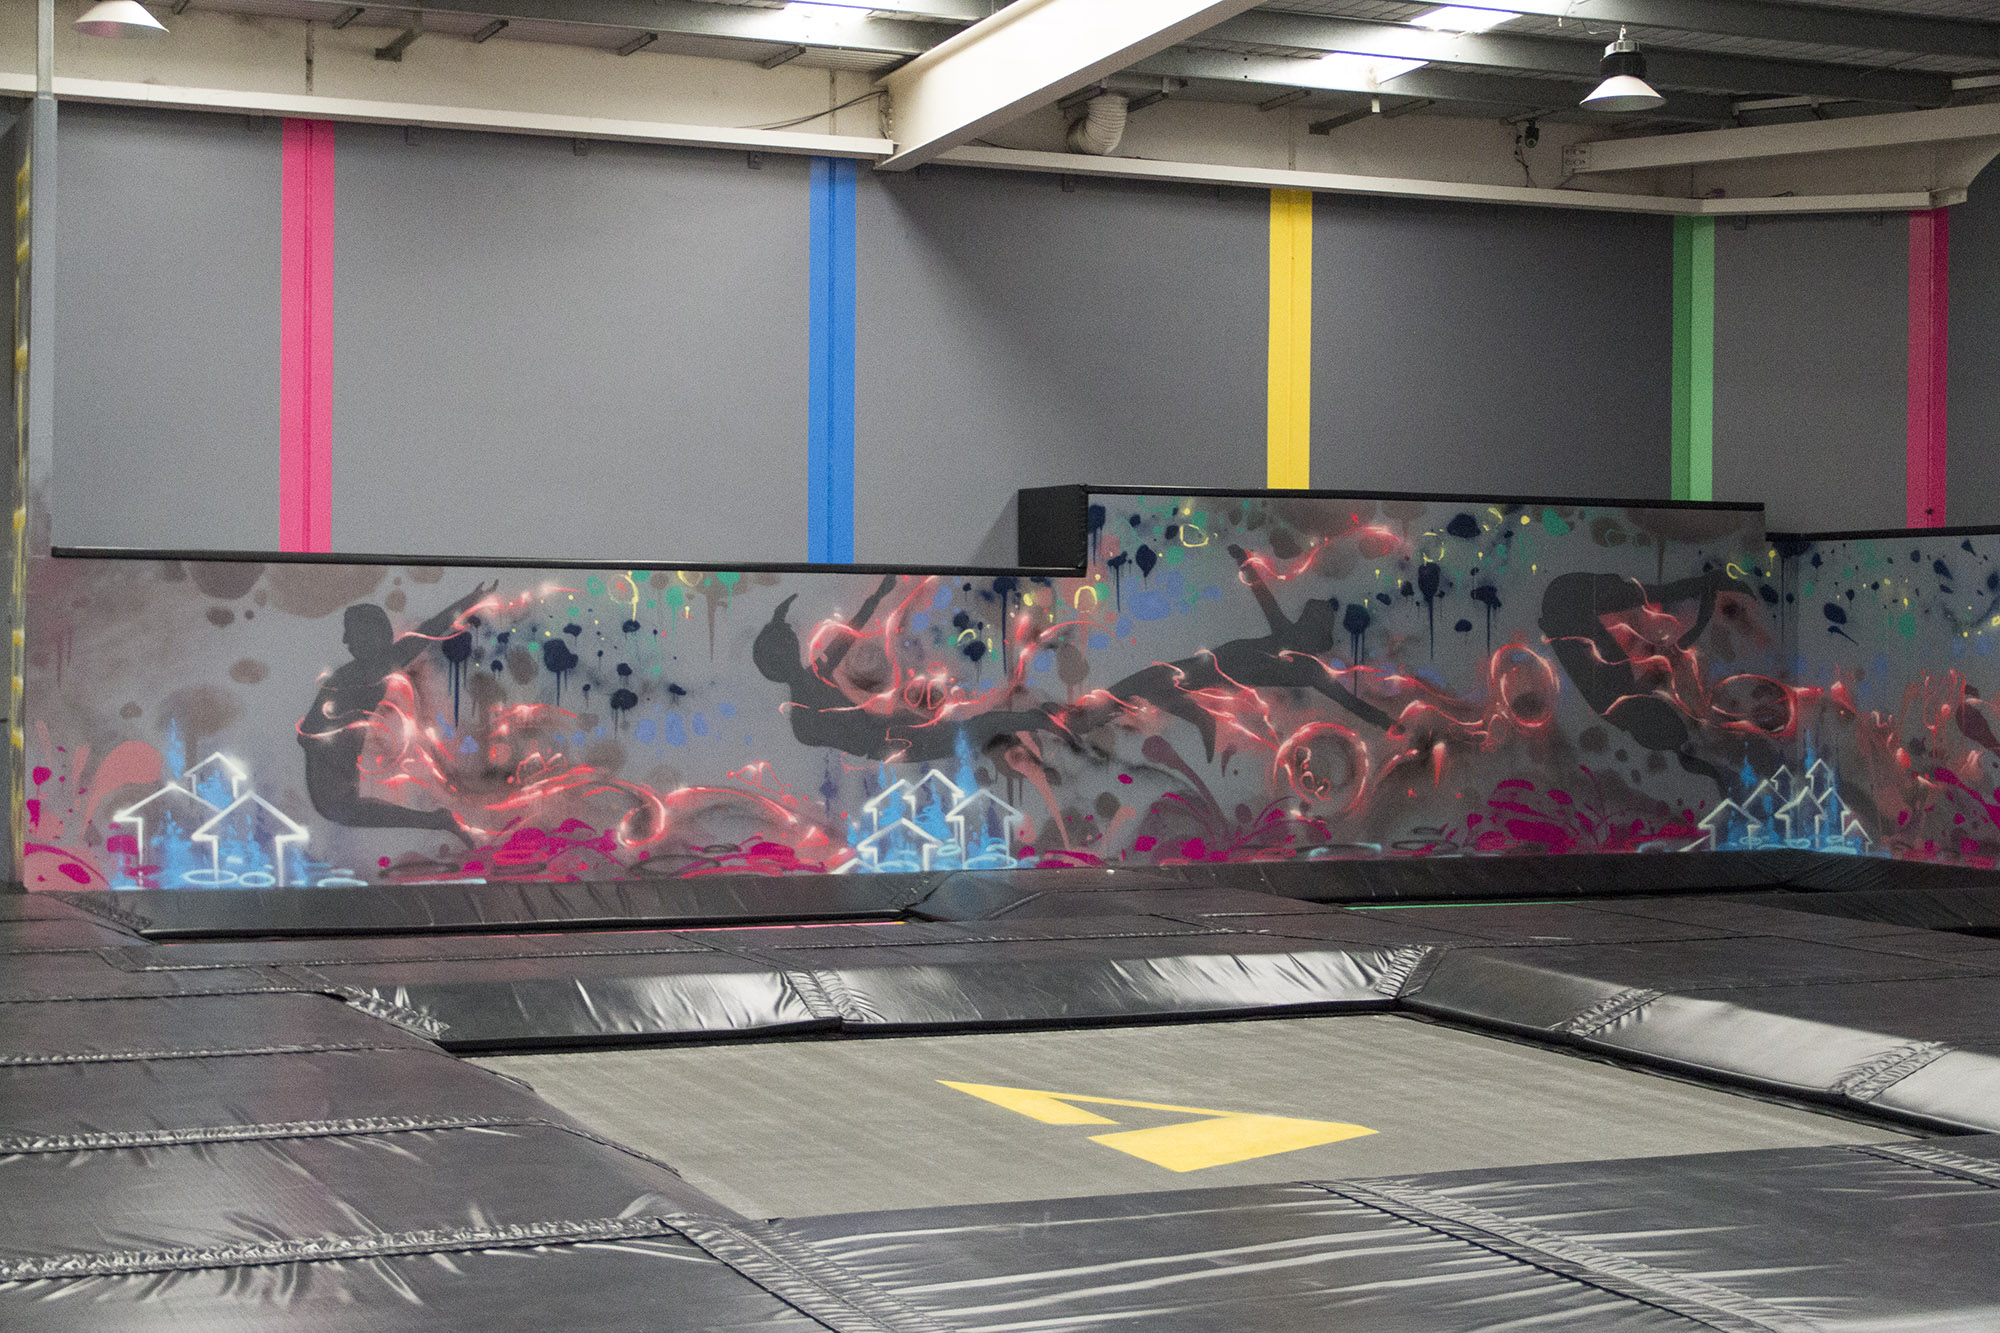 Airborne trampoline park interior decorated with urban graffiti and wall murals.